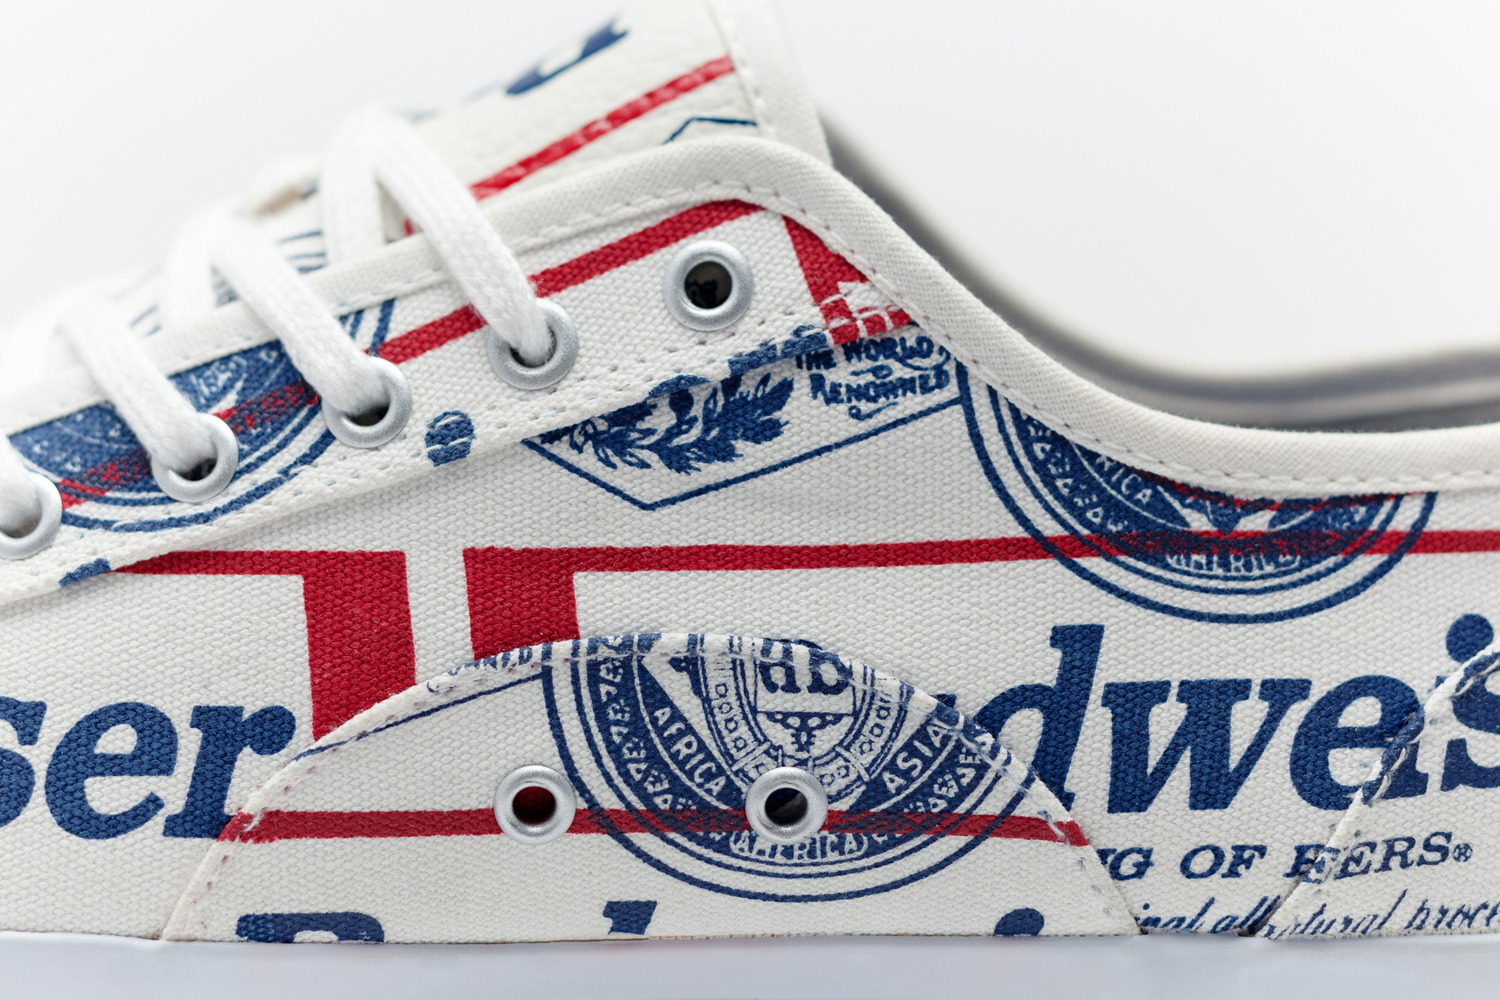 Budweiser Greats Made in America Sneakers 02